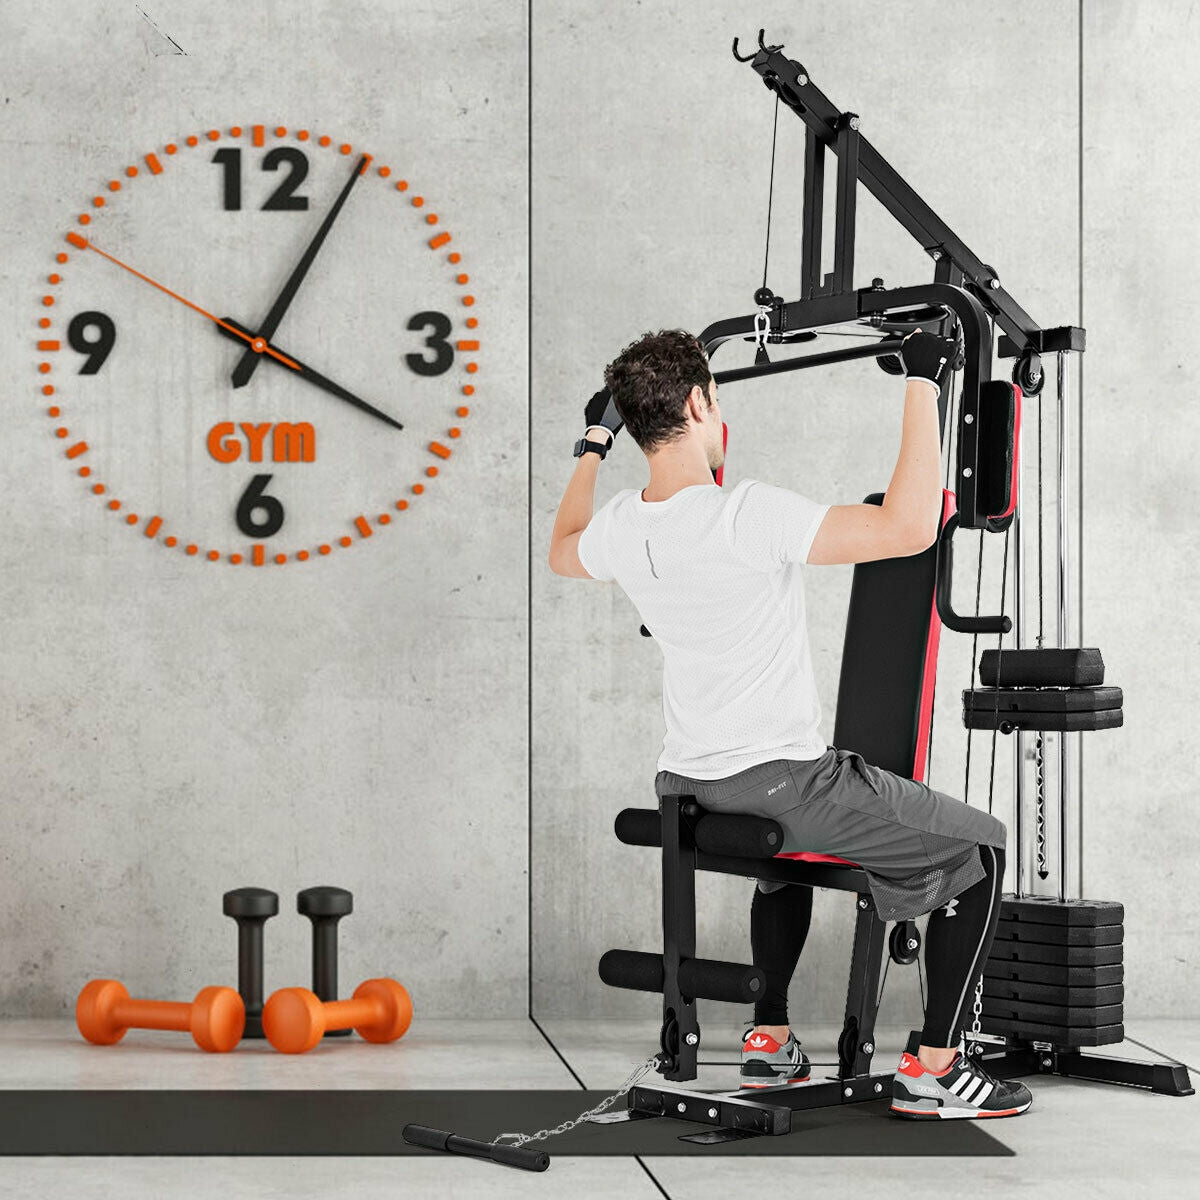 5 Day Cross trainer machine workout for Women